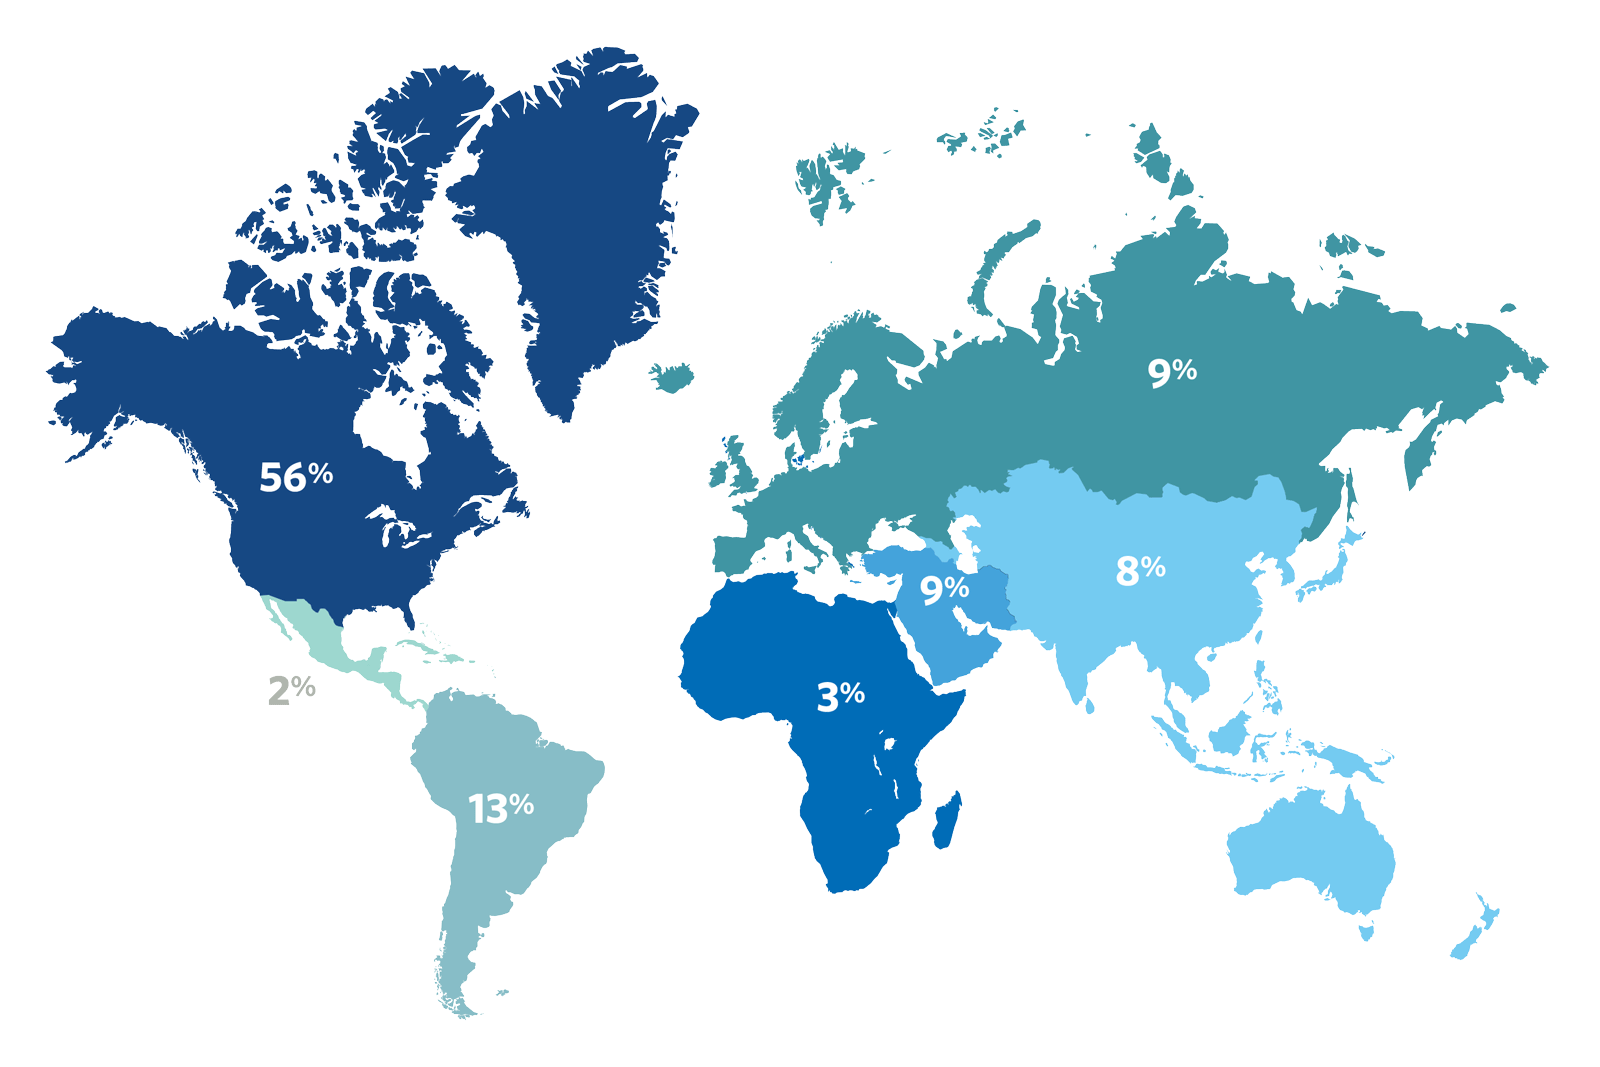 Investment Strategies and Portfolio Management participants by region